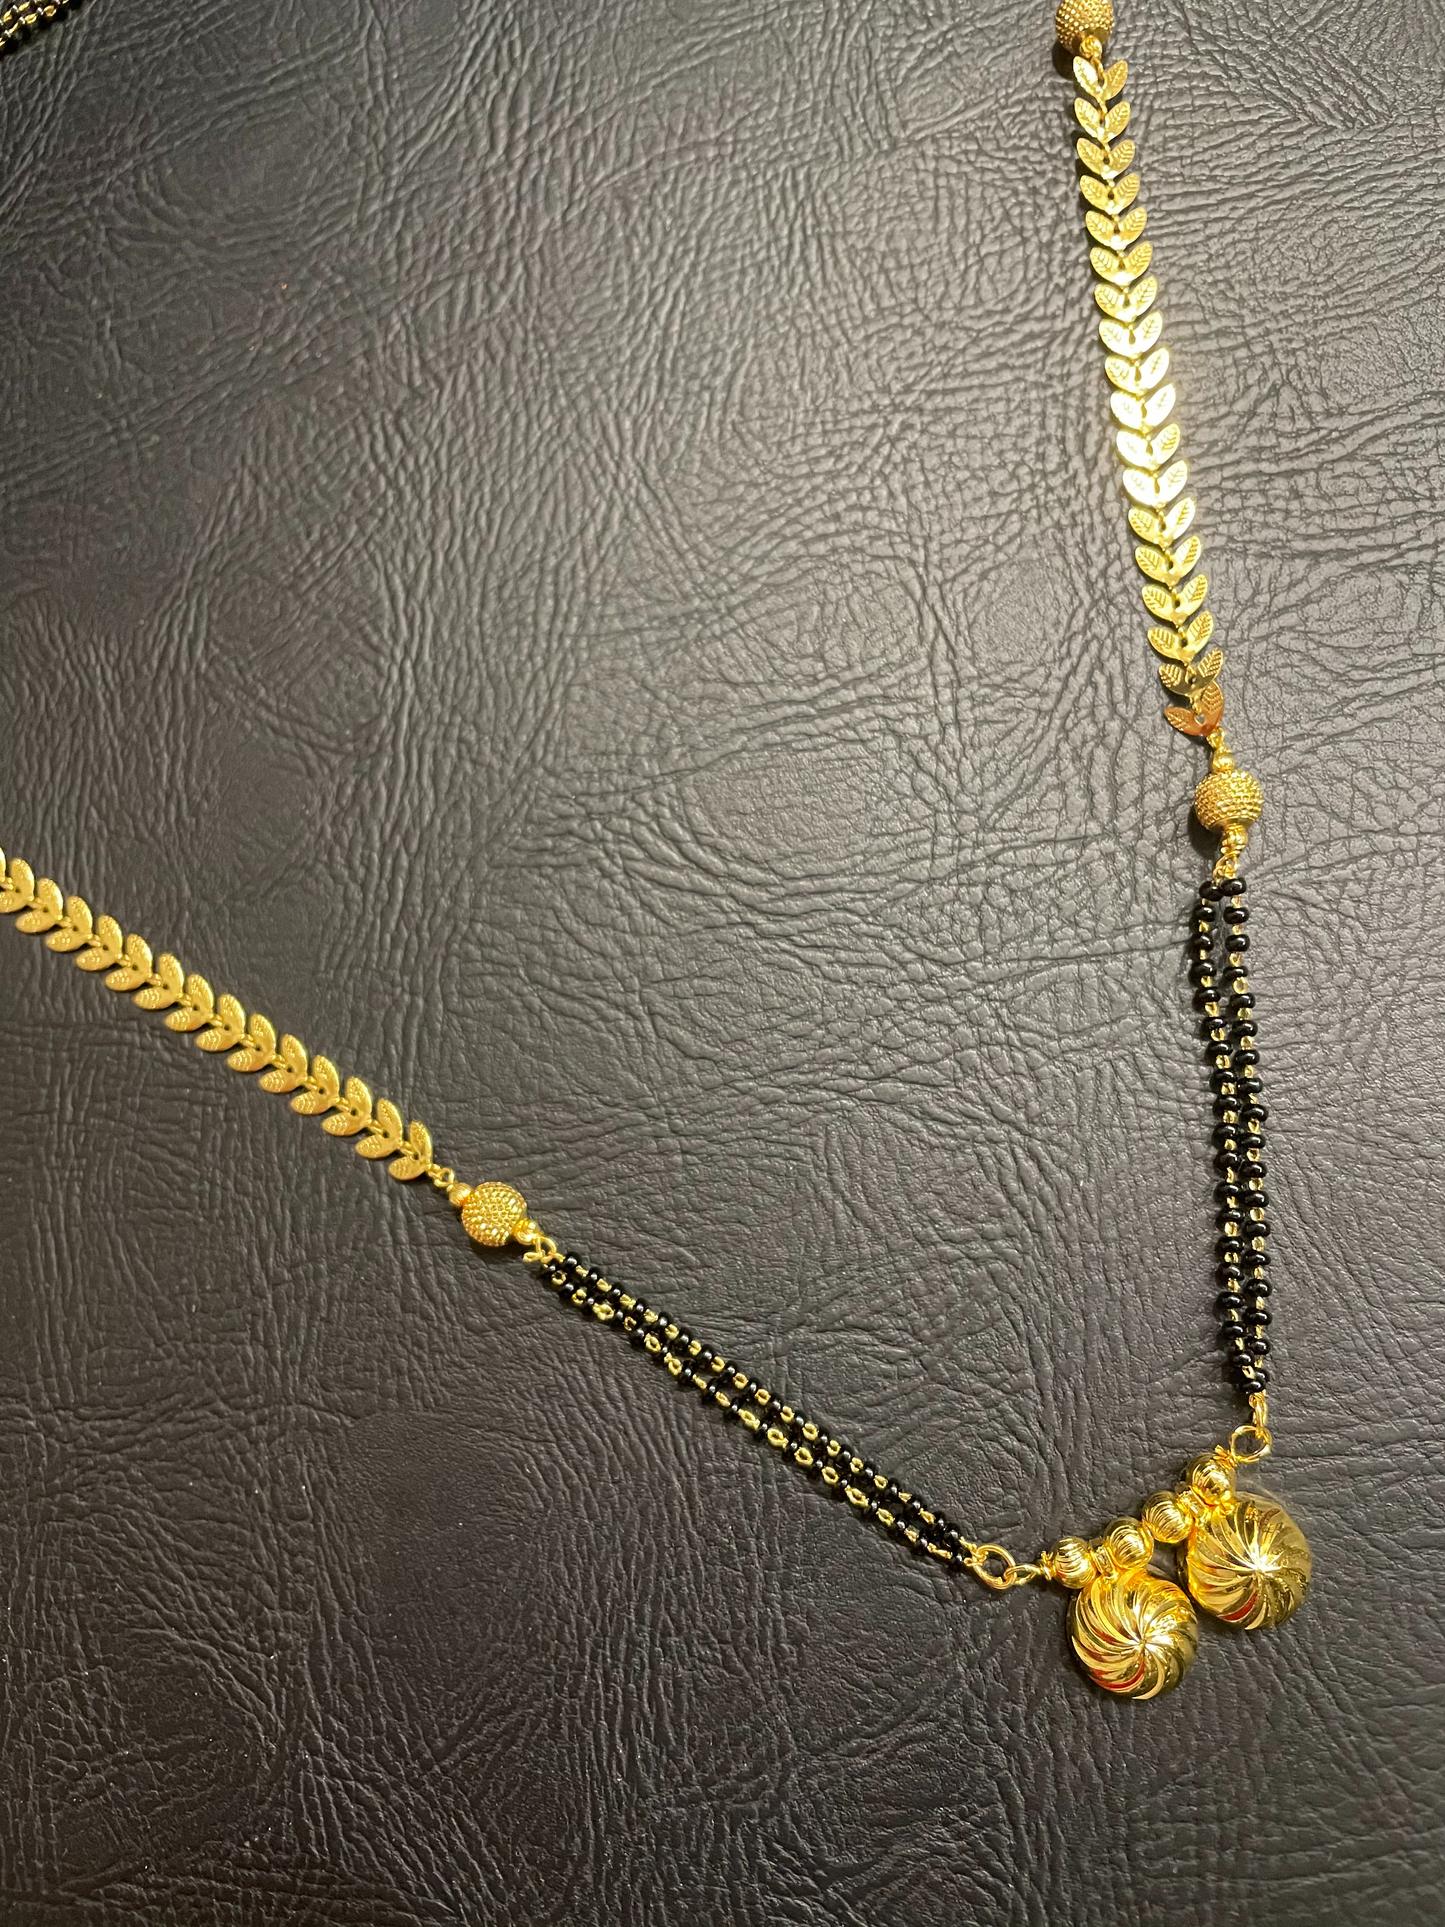 Traditional Gold Plated Long Mangalsutra Vati Pendant with Leafy Design Chain & Miniature Beads (30 Inches)